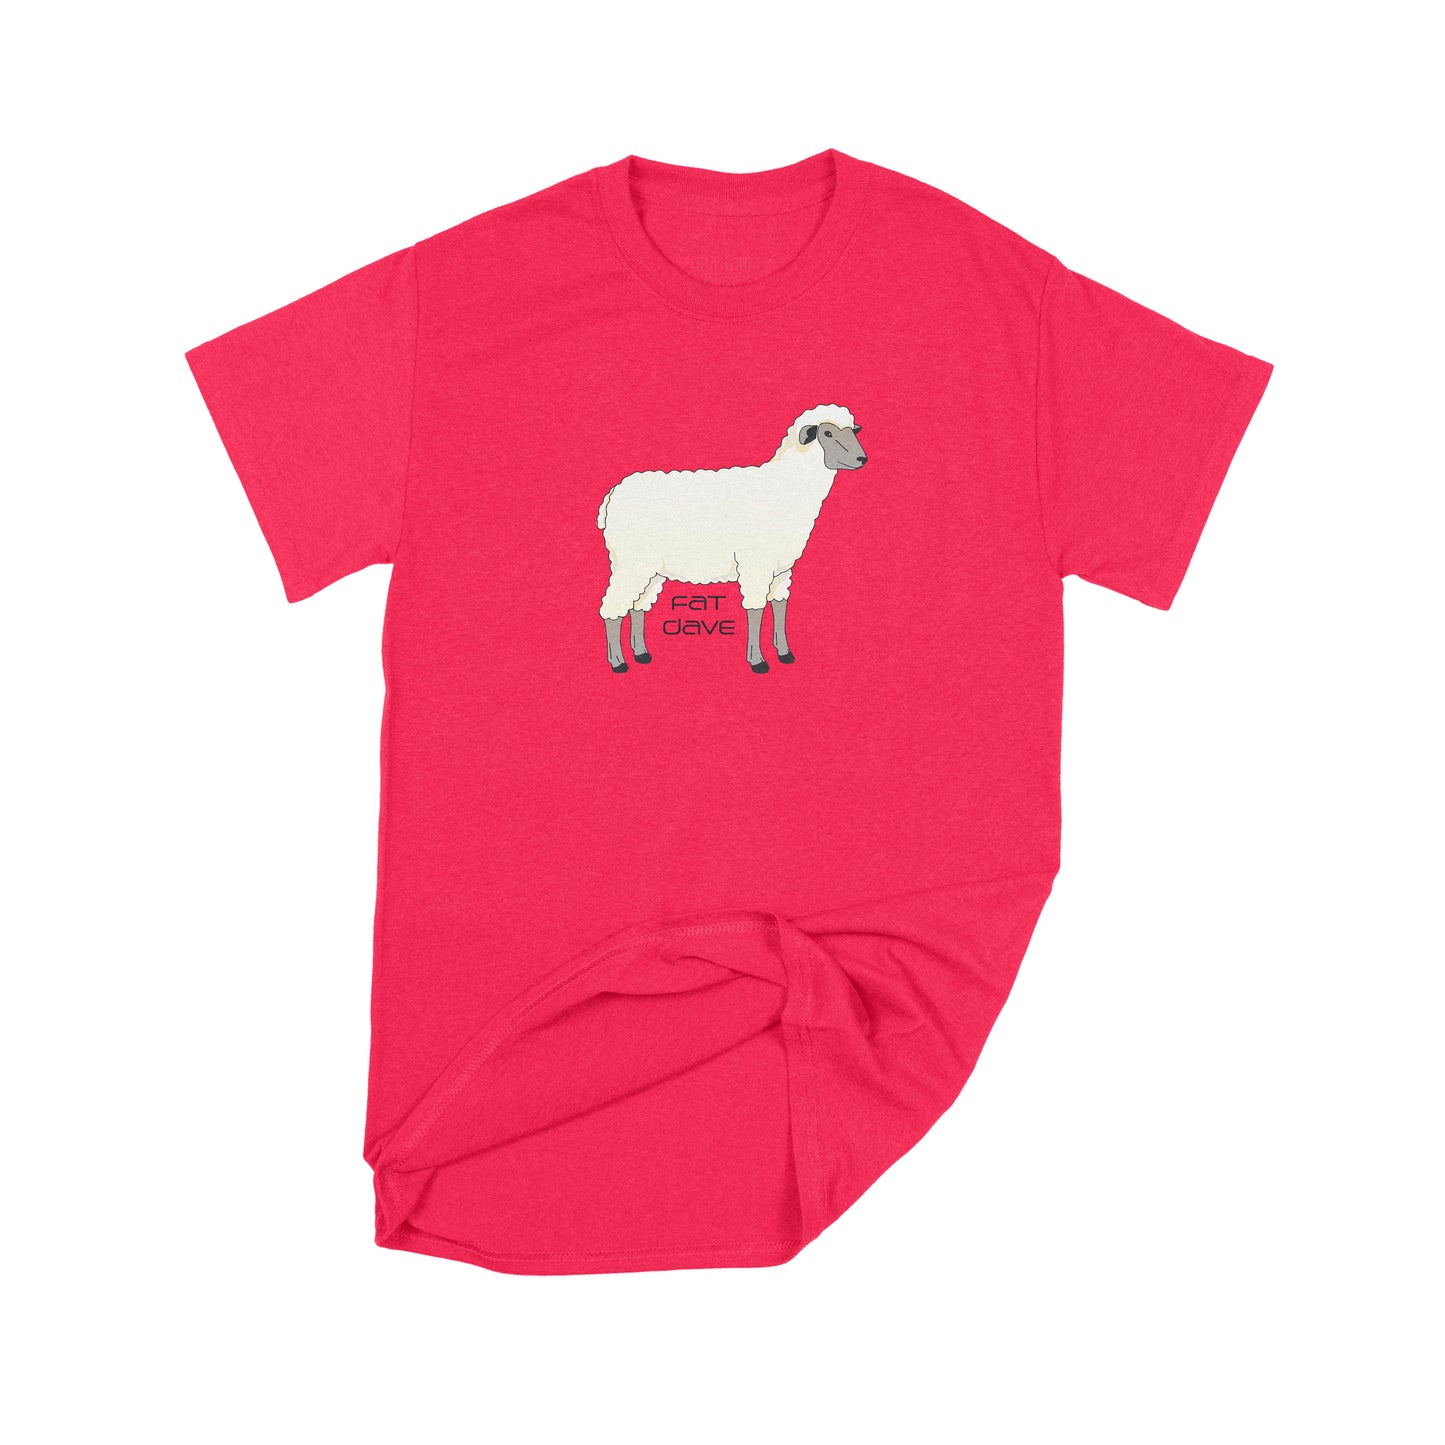 Brantford, Business, Fat Dave, Sheep, T-Shirt, Red